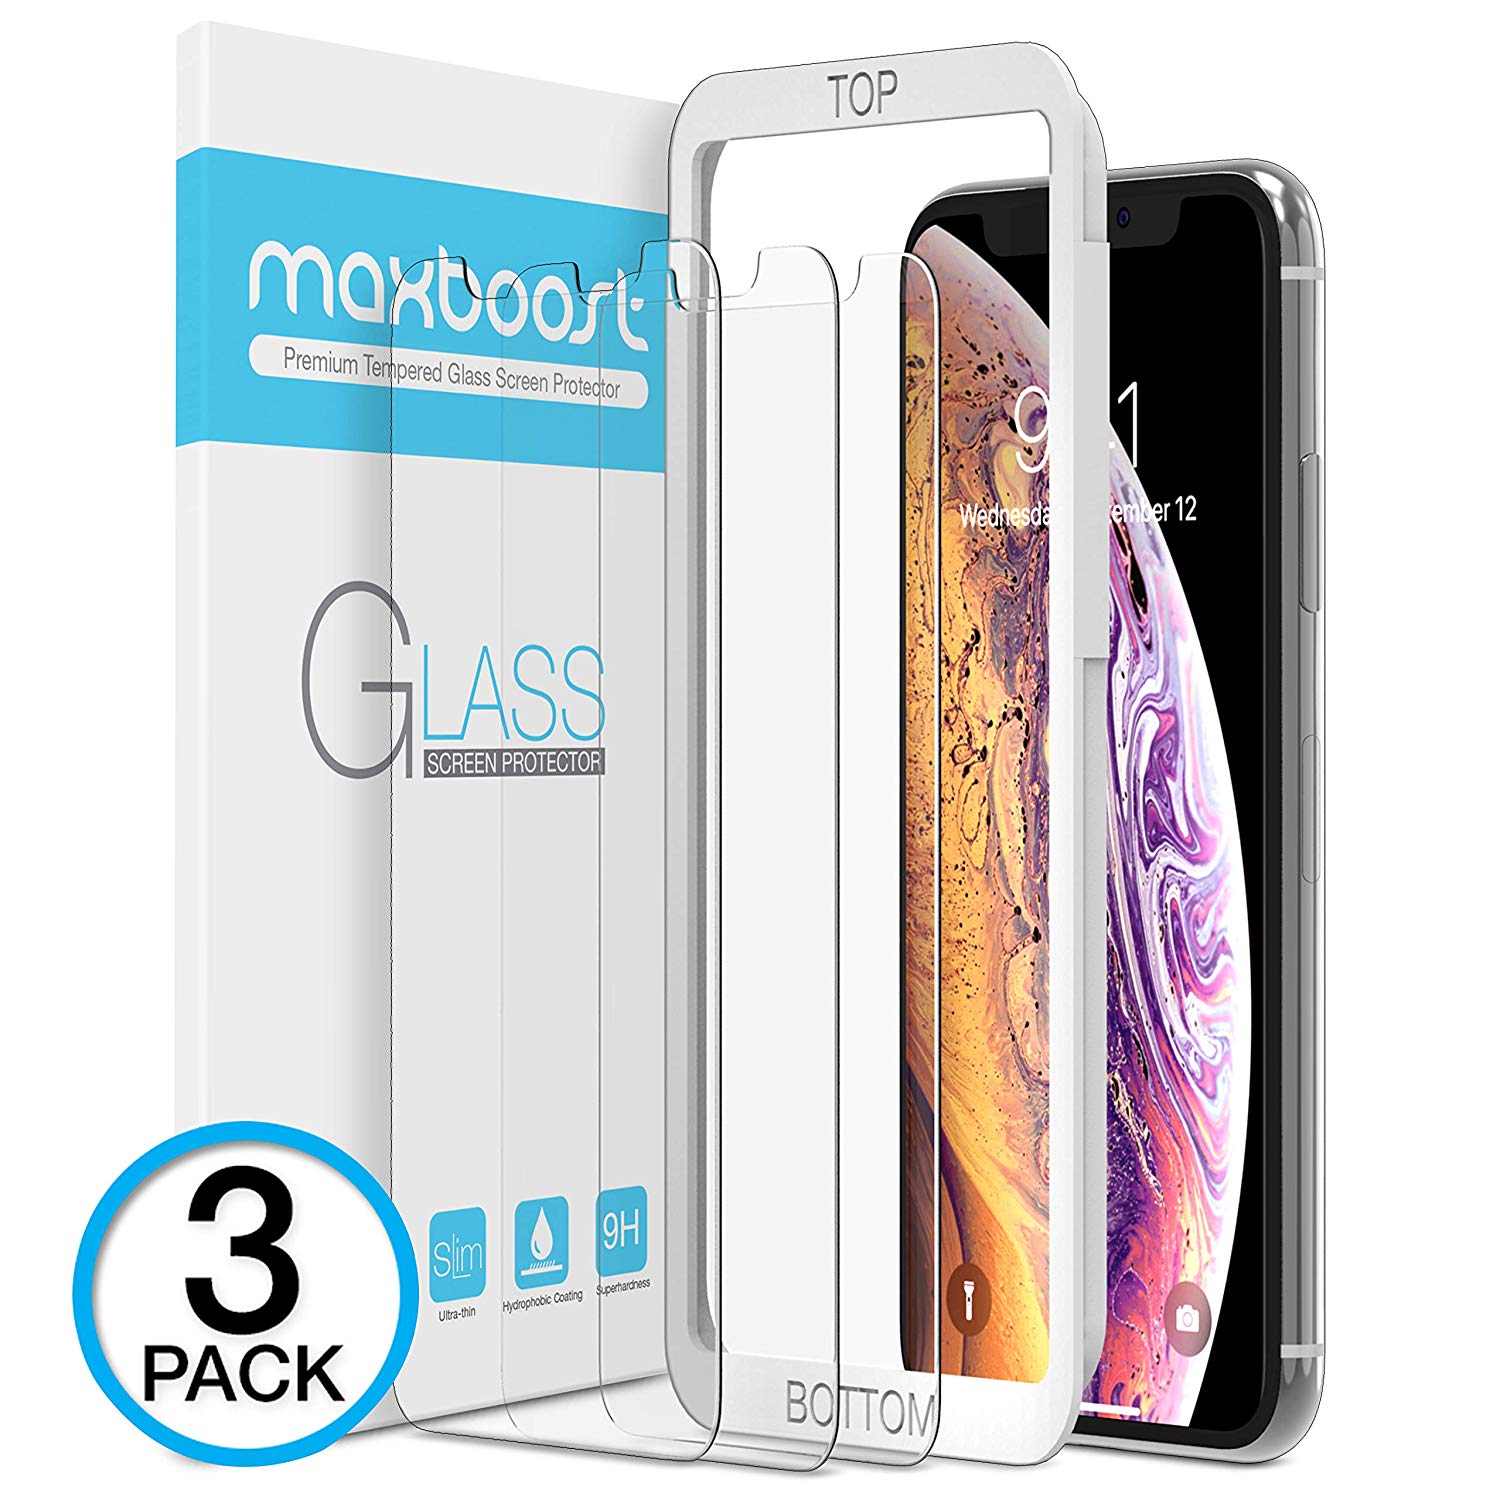 You are currently viewing Maxboost Tempered Glass